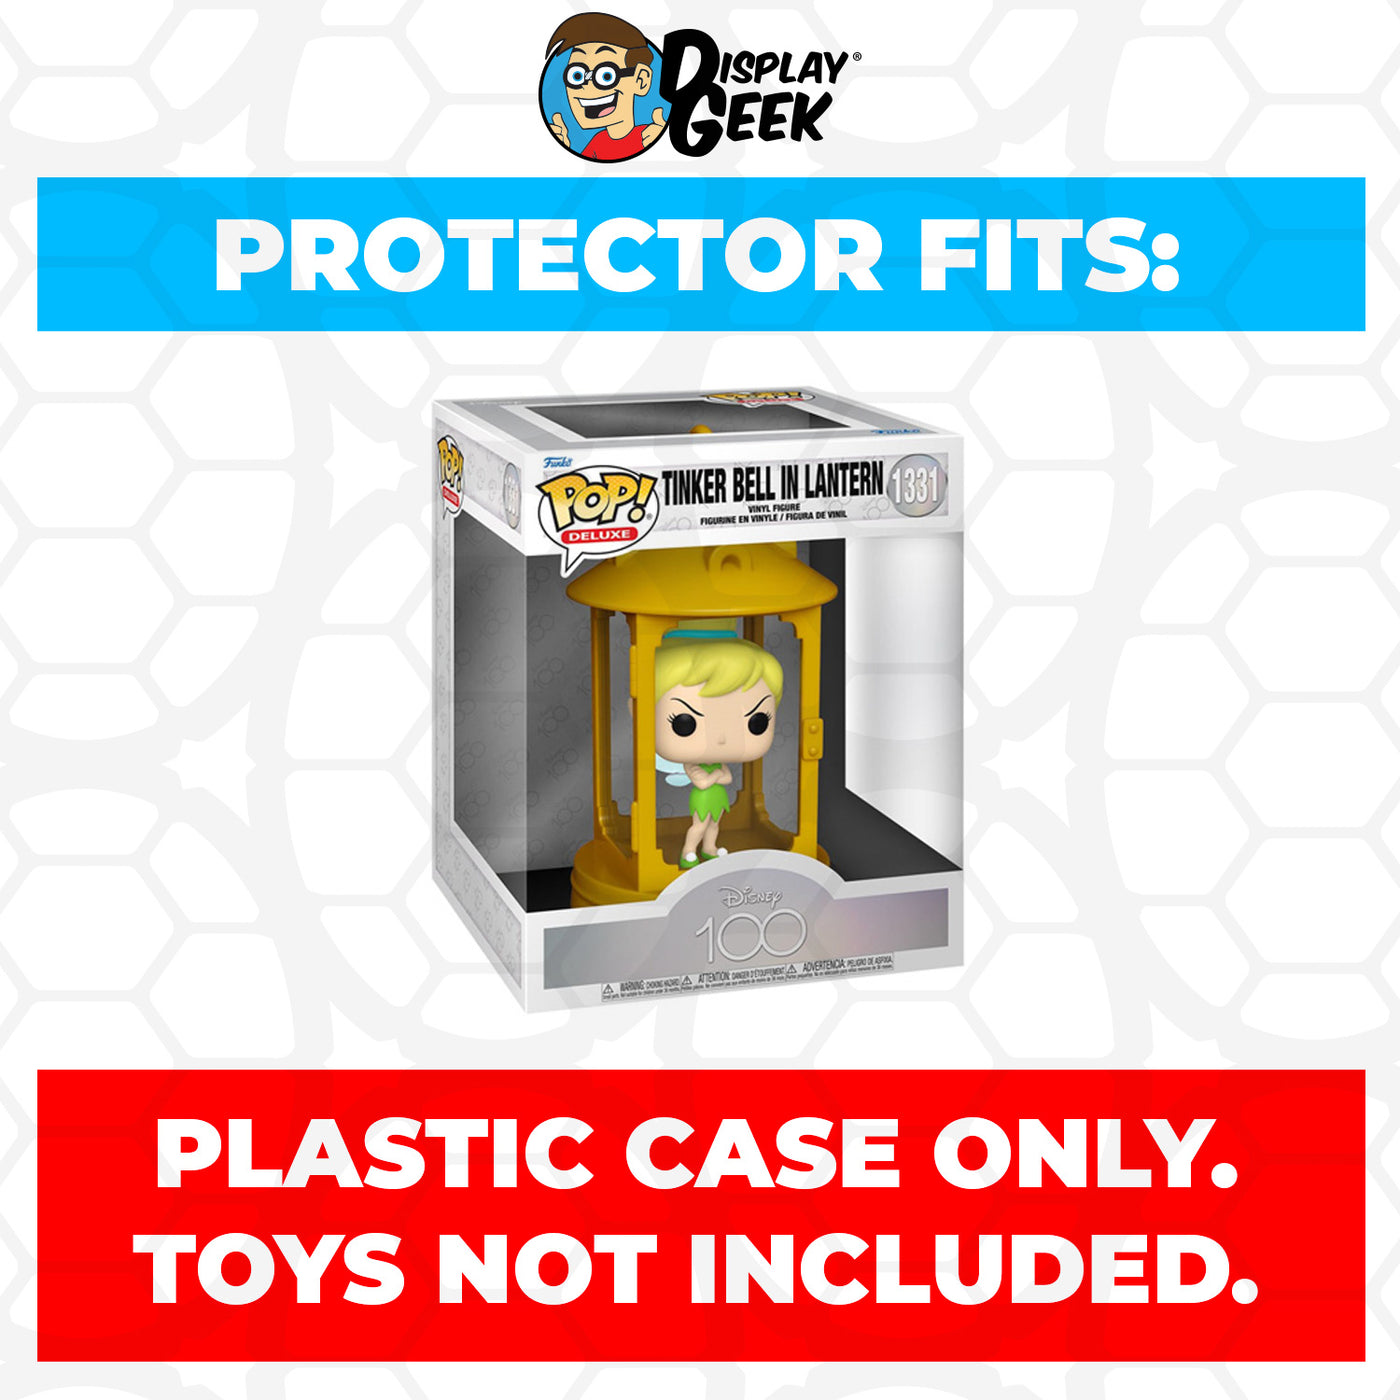 Pop Protector for Tinker Bell in Lantern #1331 Funko Pop Deluxe on The Protector Guide App by Display Geek